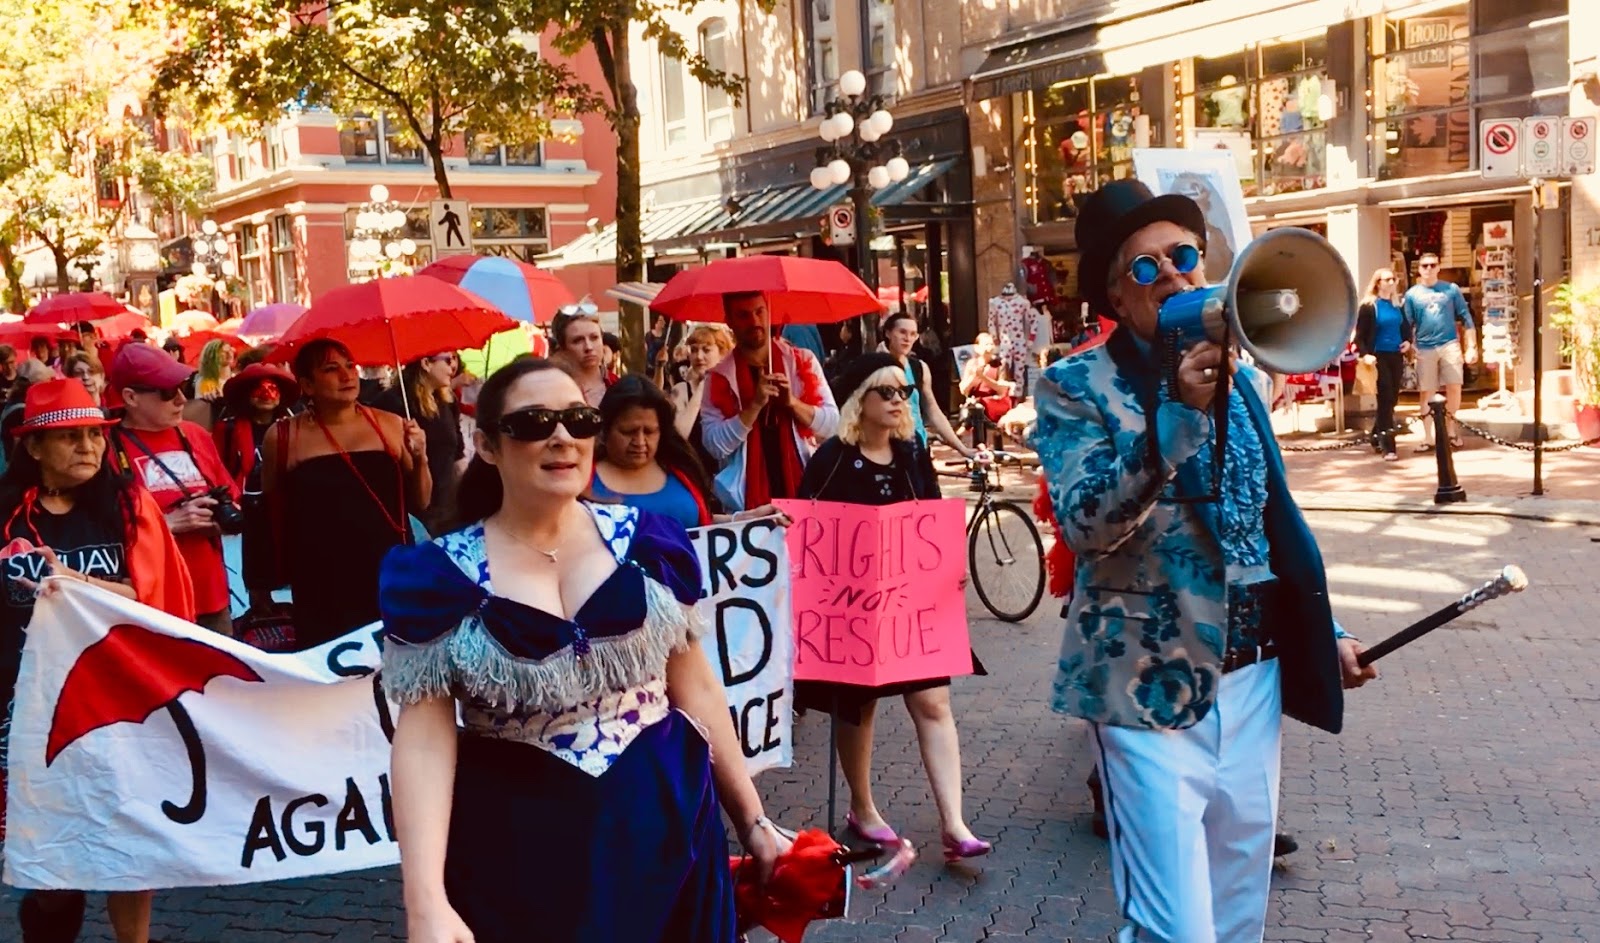 DeeJay and Chili Bean (holding SWUAV banner) and Triple-X's Kerry Porth (front left) and Andy Sorfleet (with bullhorn) lead the Red Umbrella March through Gastown. Vancouver, June 9, 2018. Photo: Elaine Ayres.